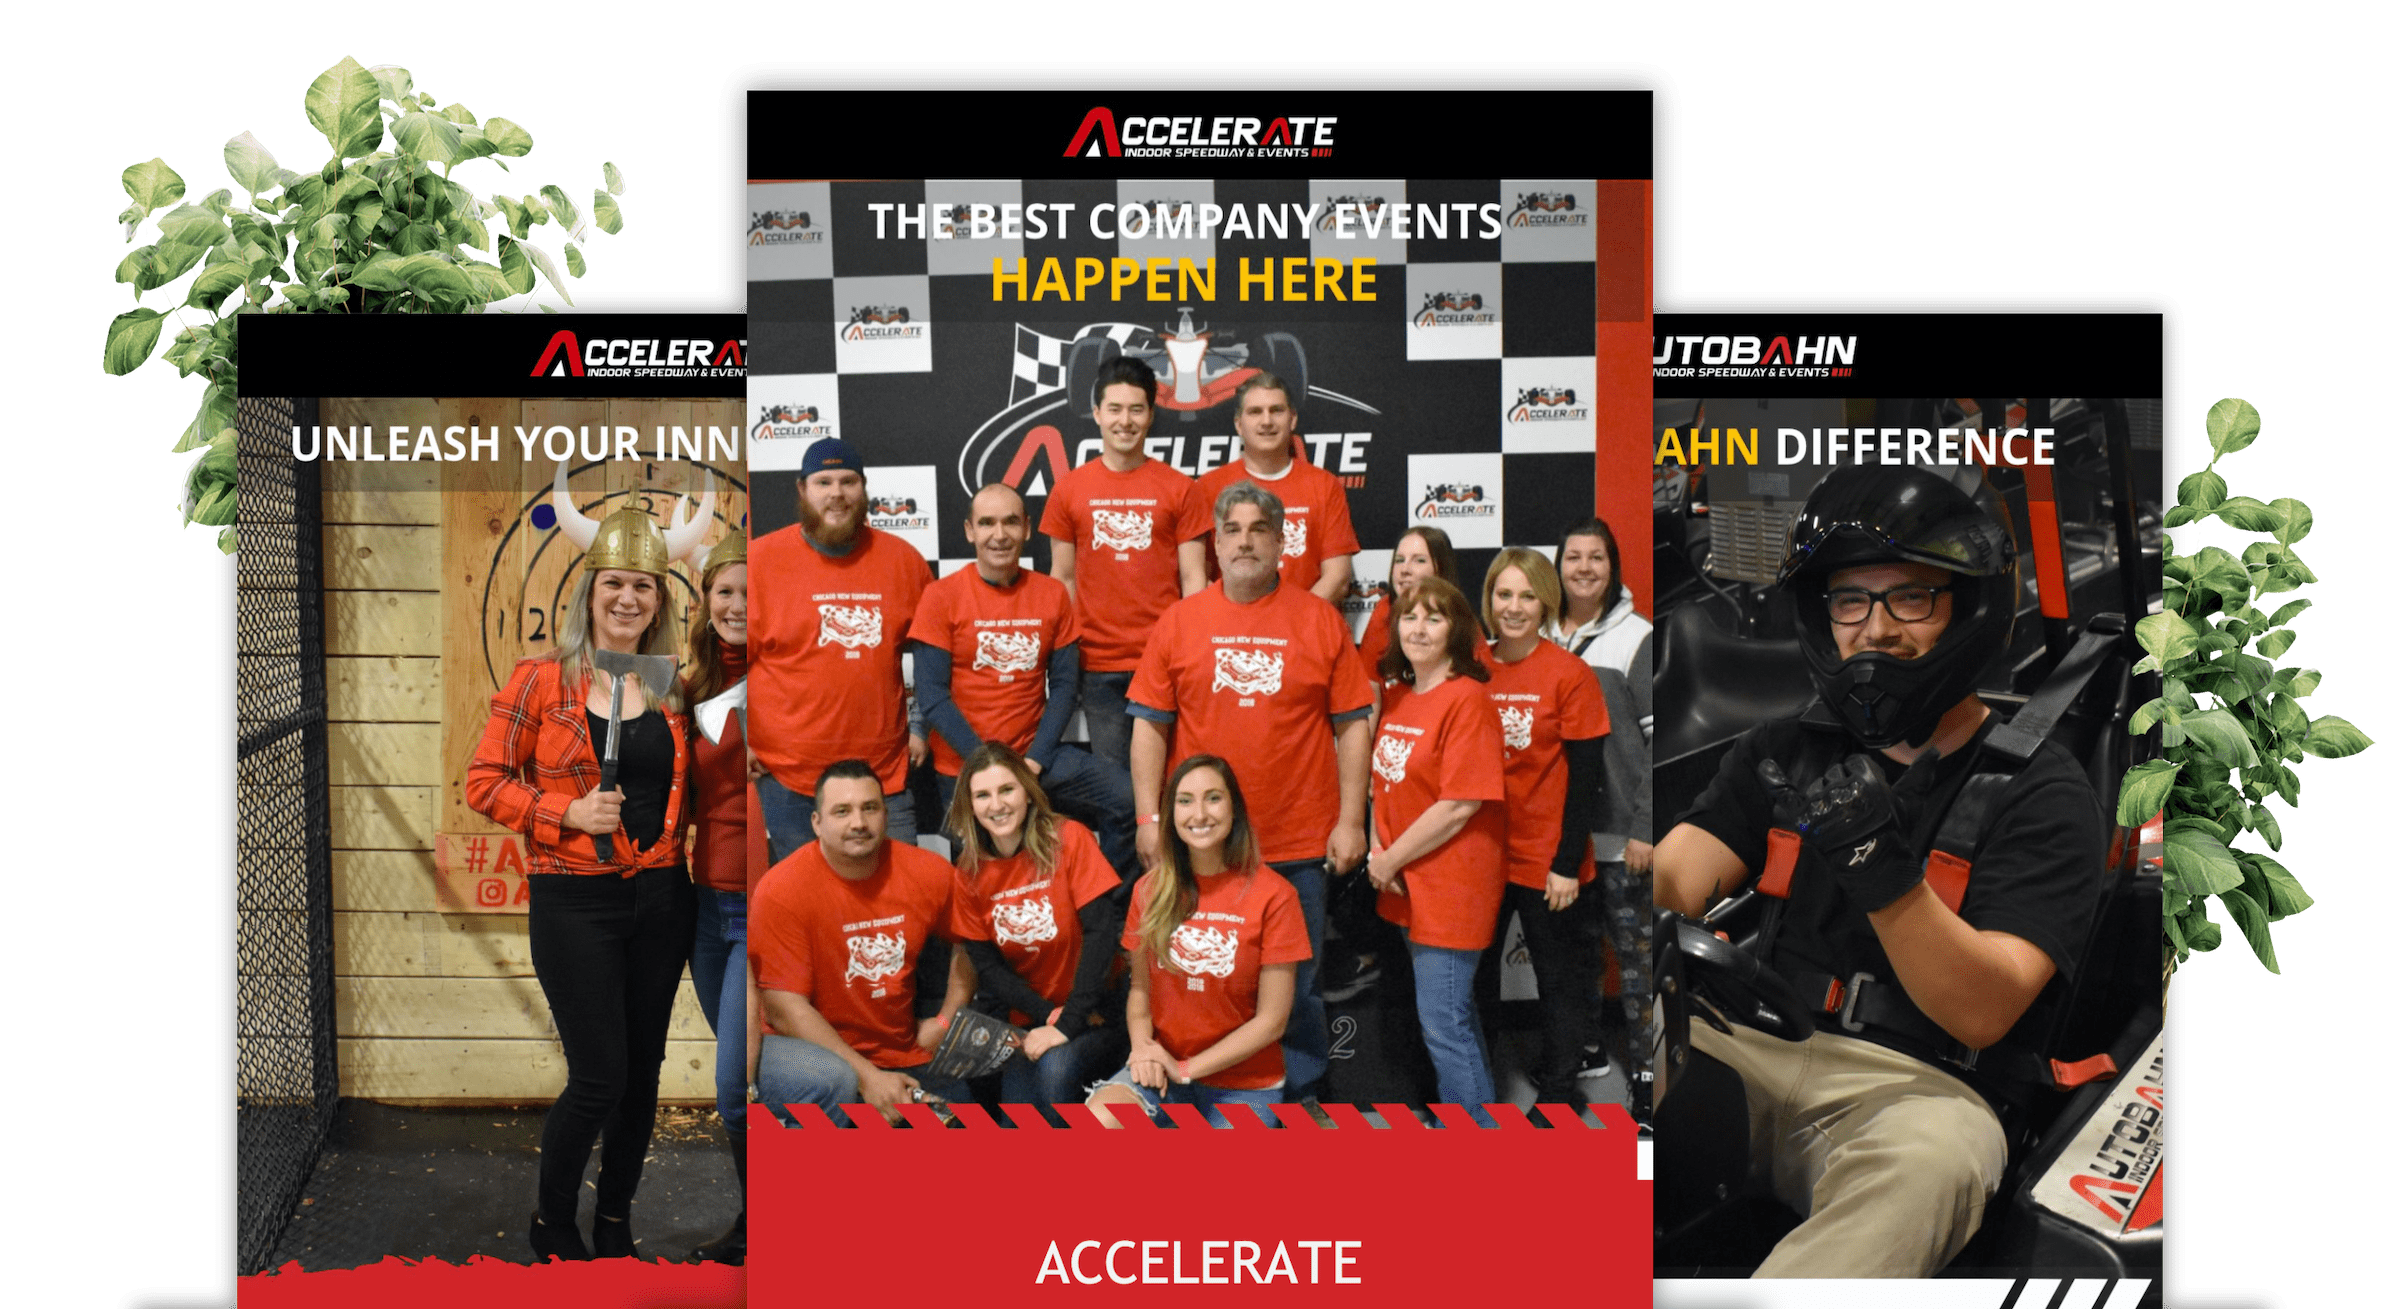 Autobahn + Accelerate Campaign Emails